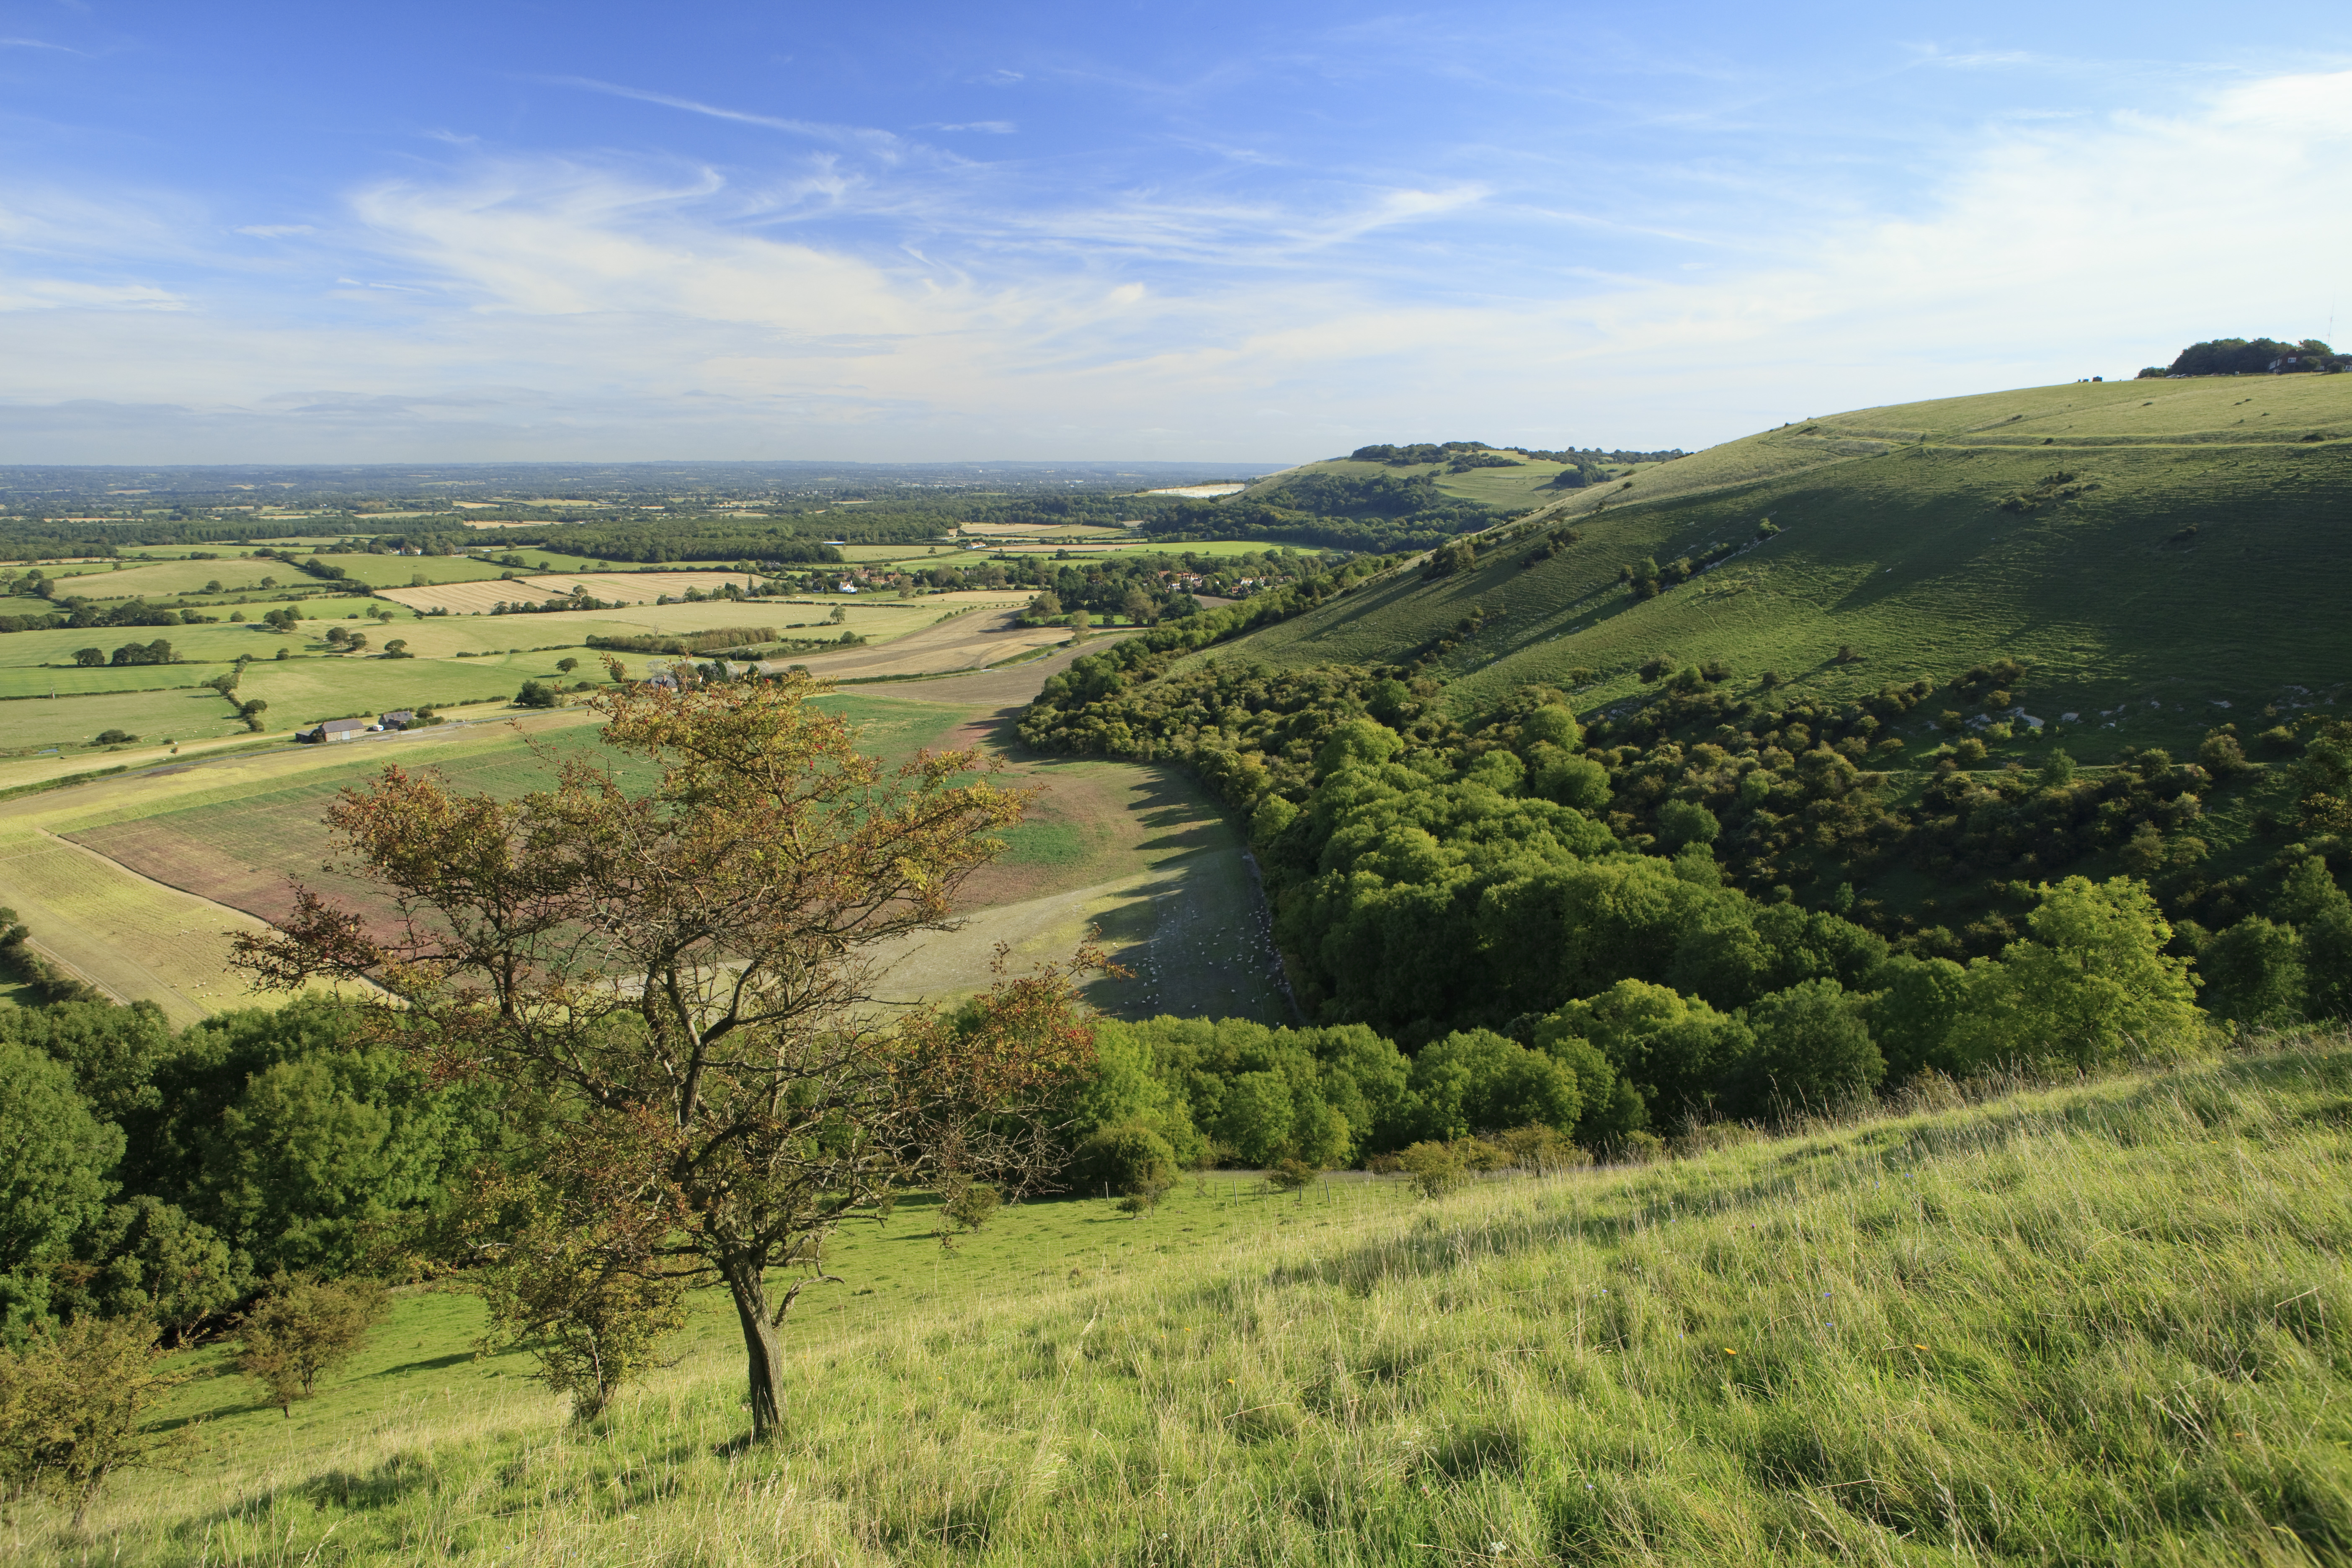 The landscape of the South Downs (John Miller/National Trust Images/PA)